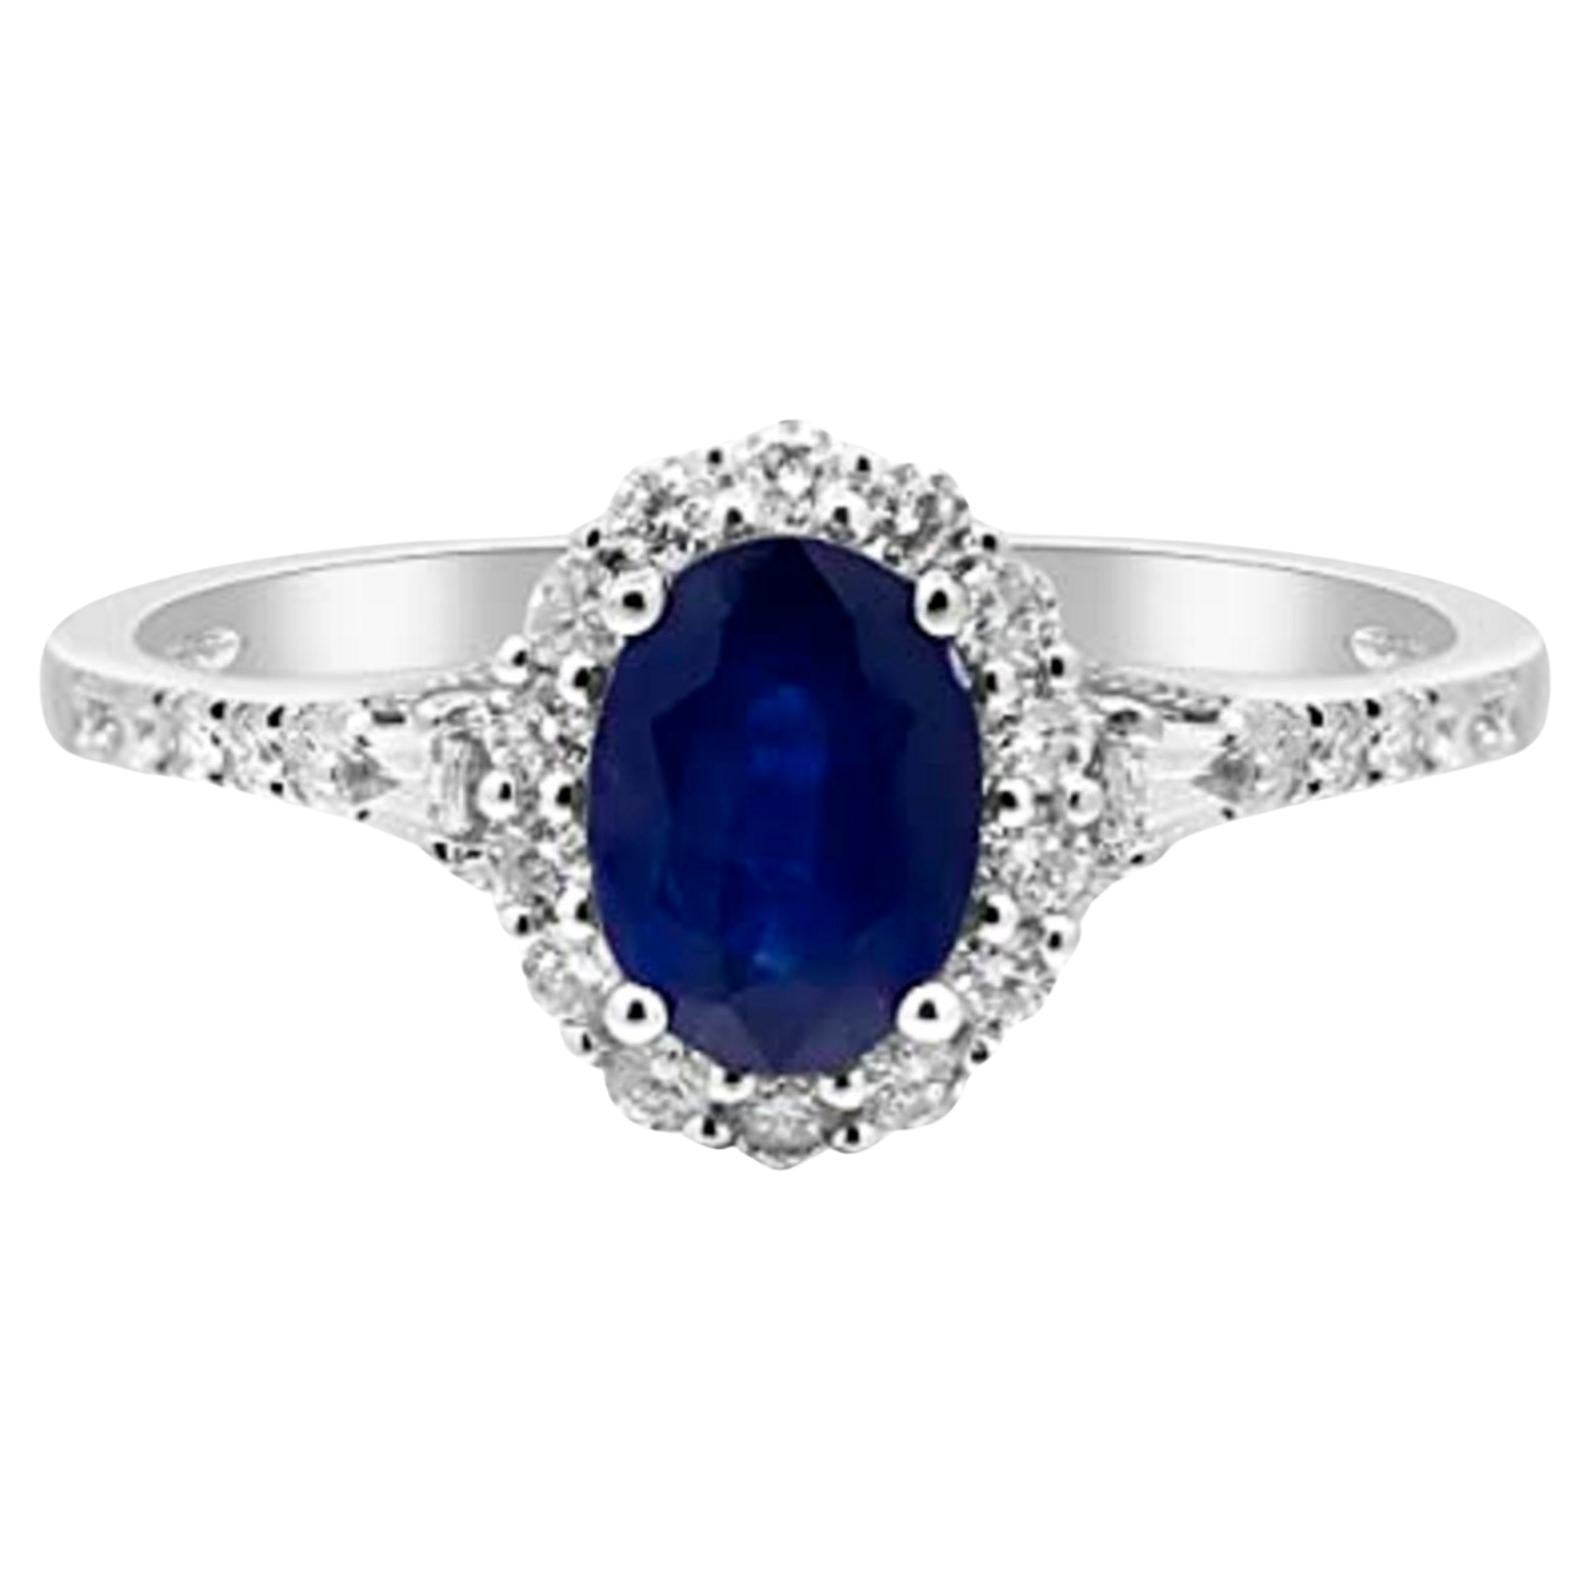  Gin & Grace 14K White Gold Genuine Blue Sapphire Ring with Diamonds for women For Sale